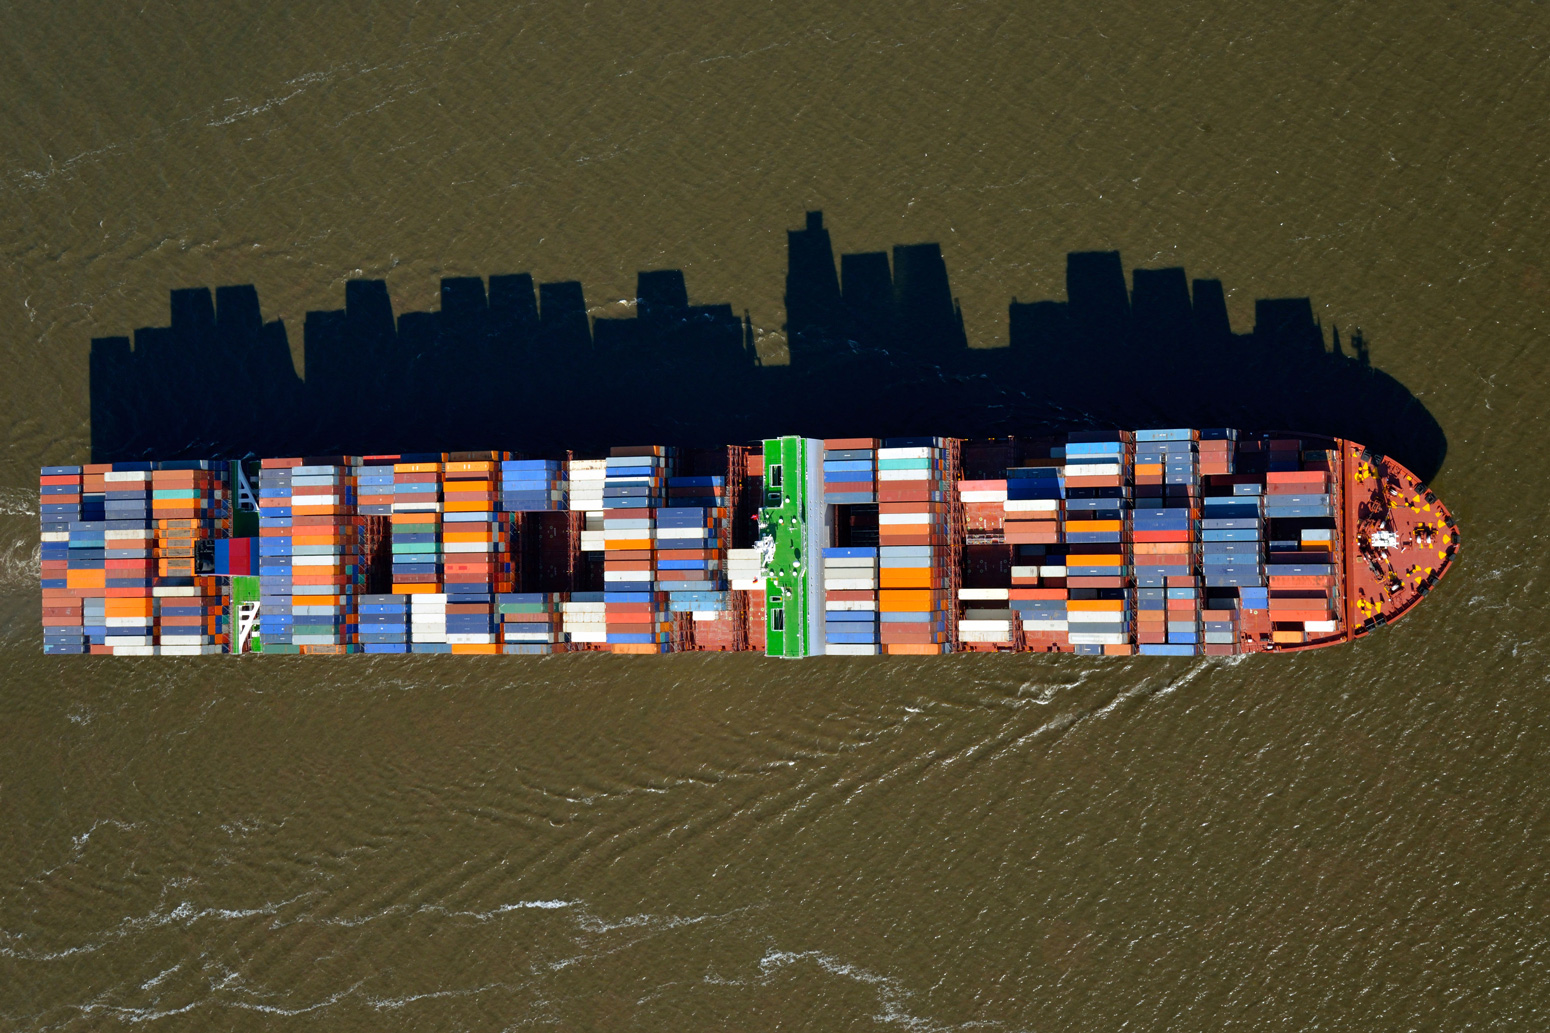 A container ship outside Hamburg, Germany